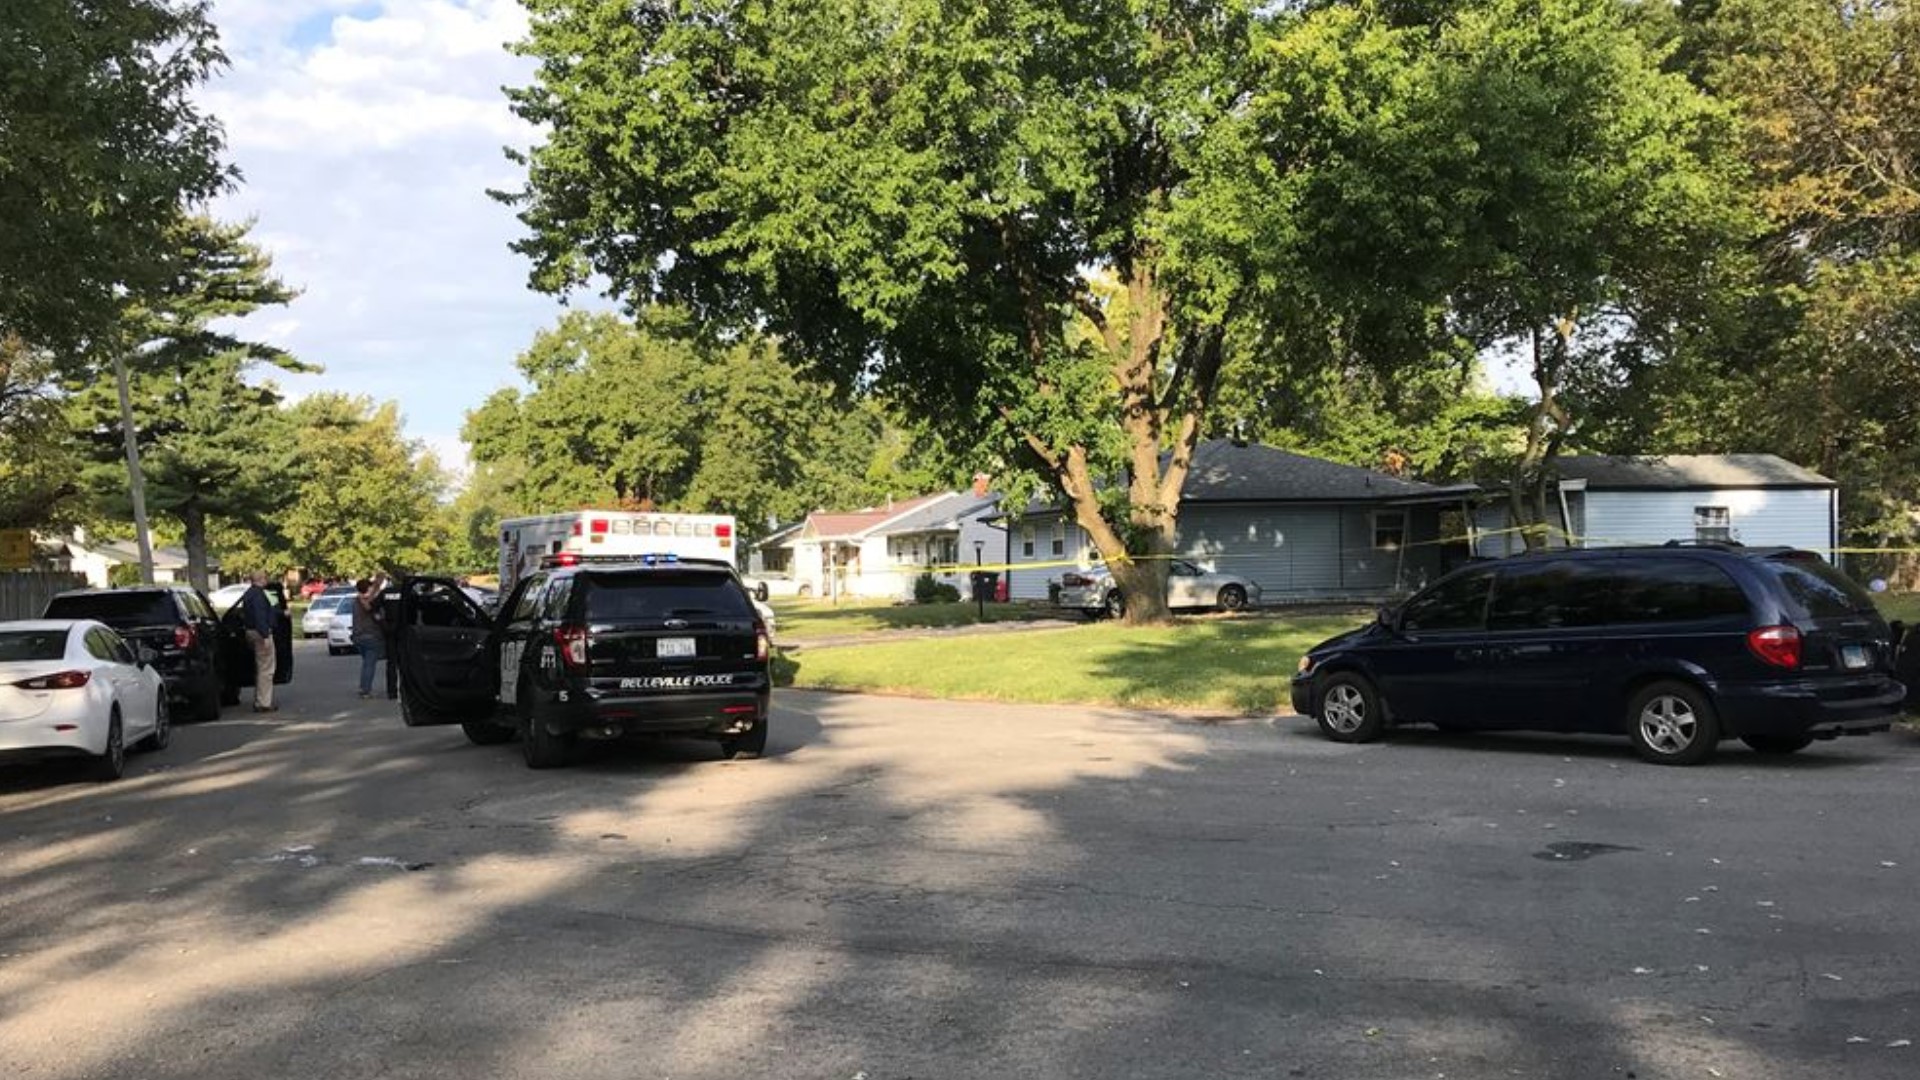 This is the second shooting in Belleville this week.